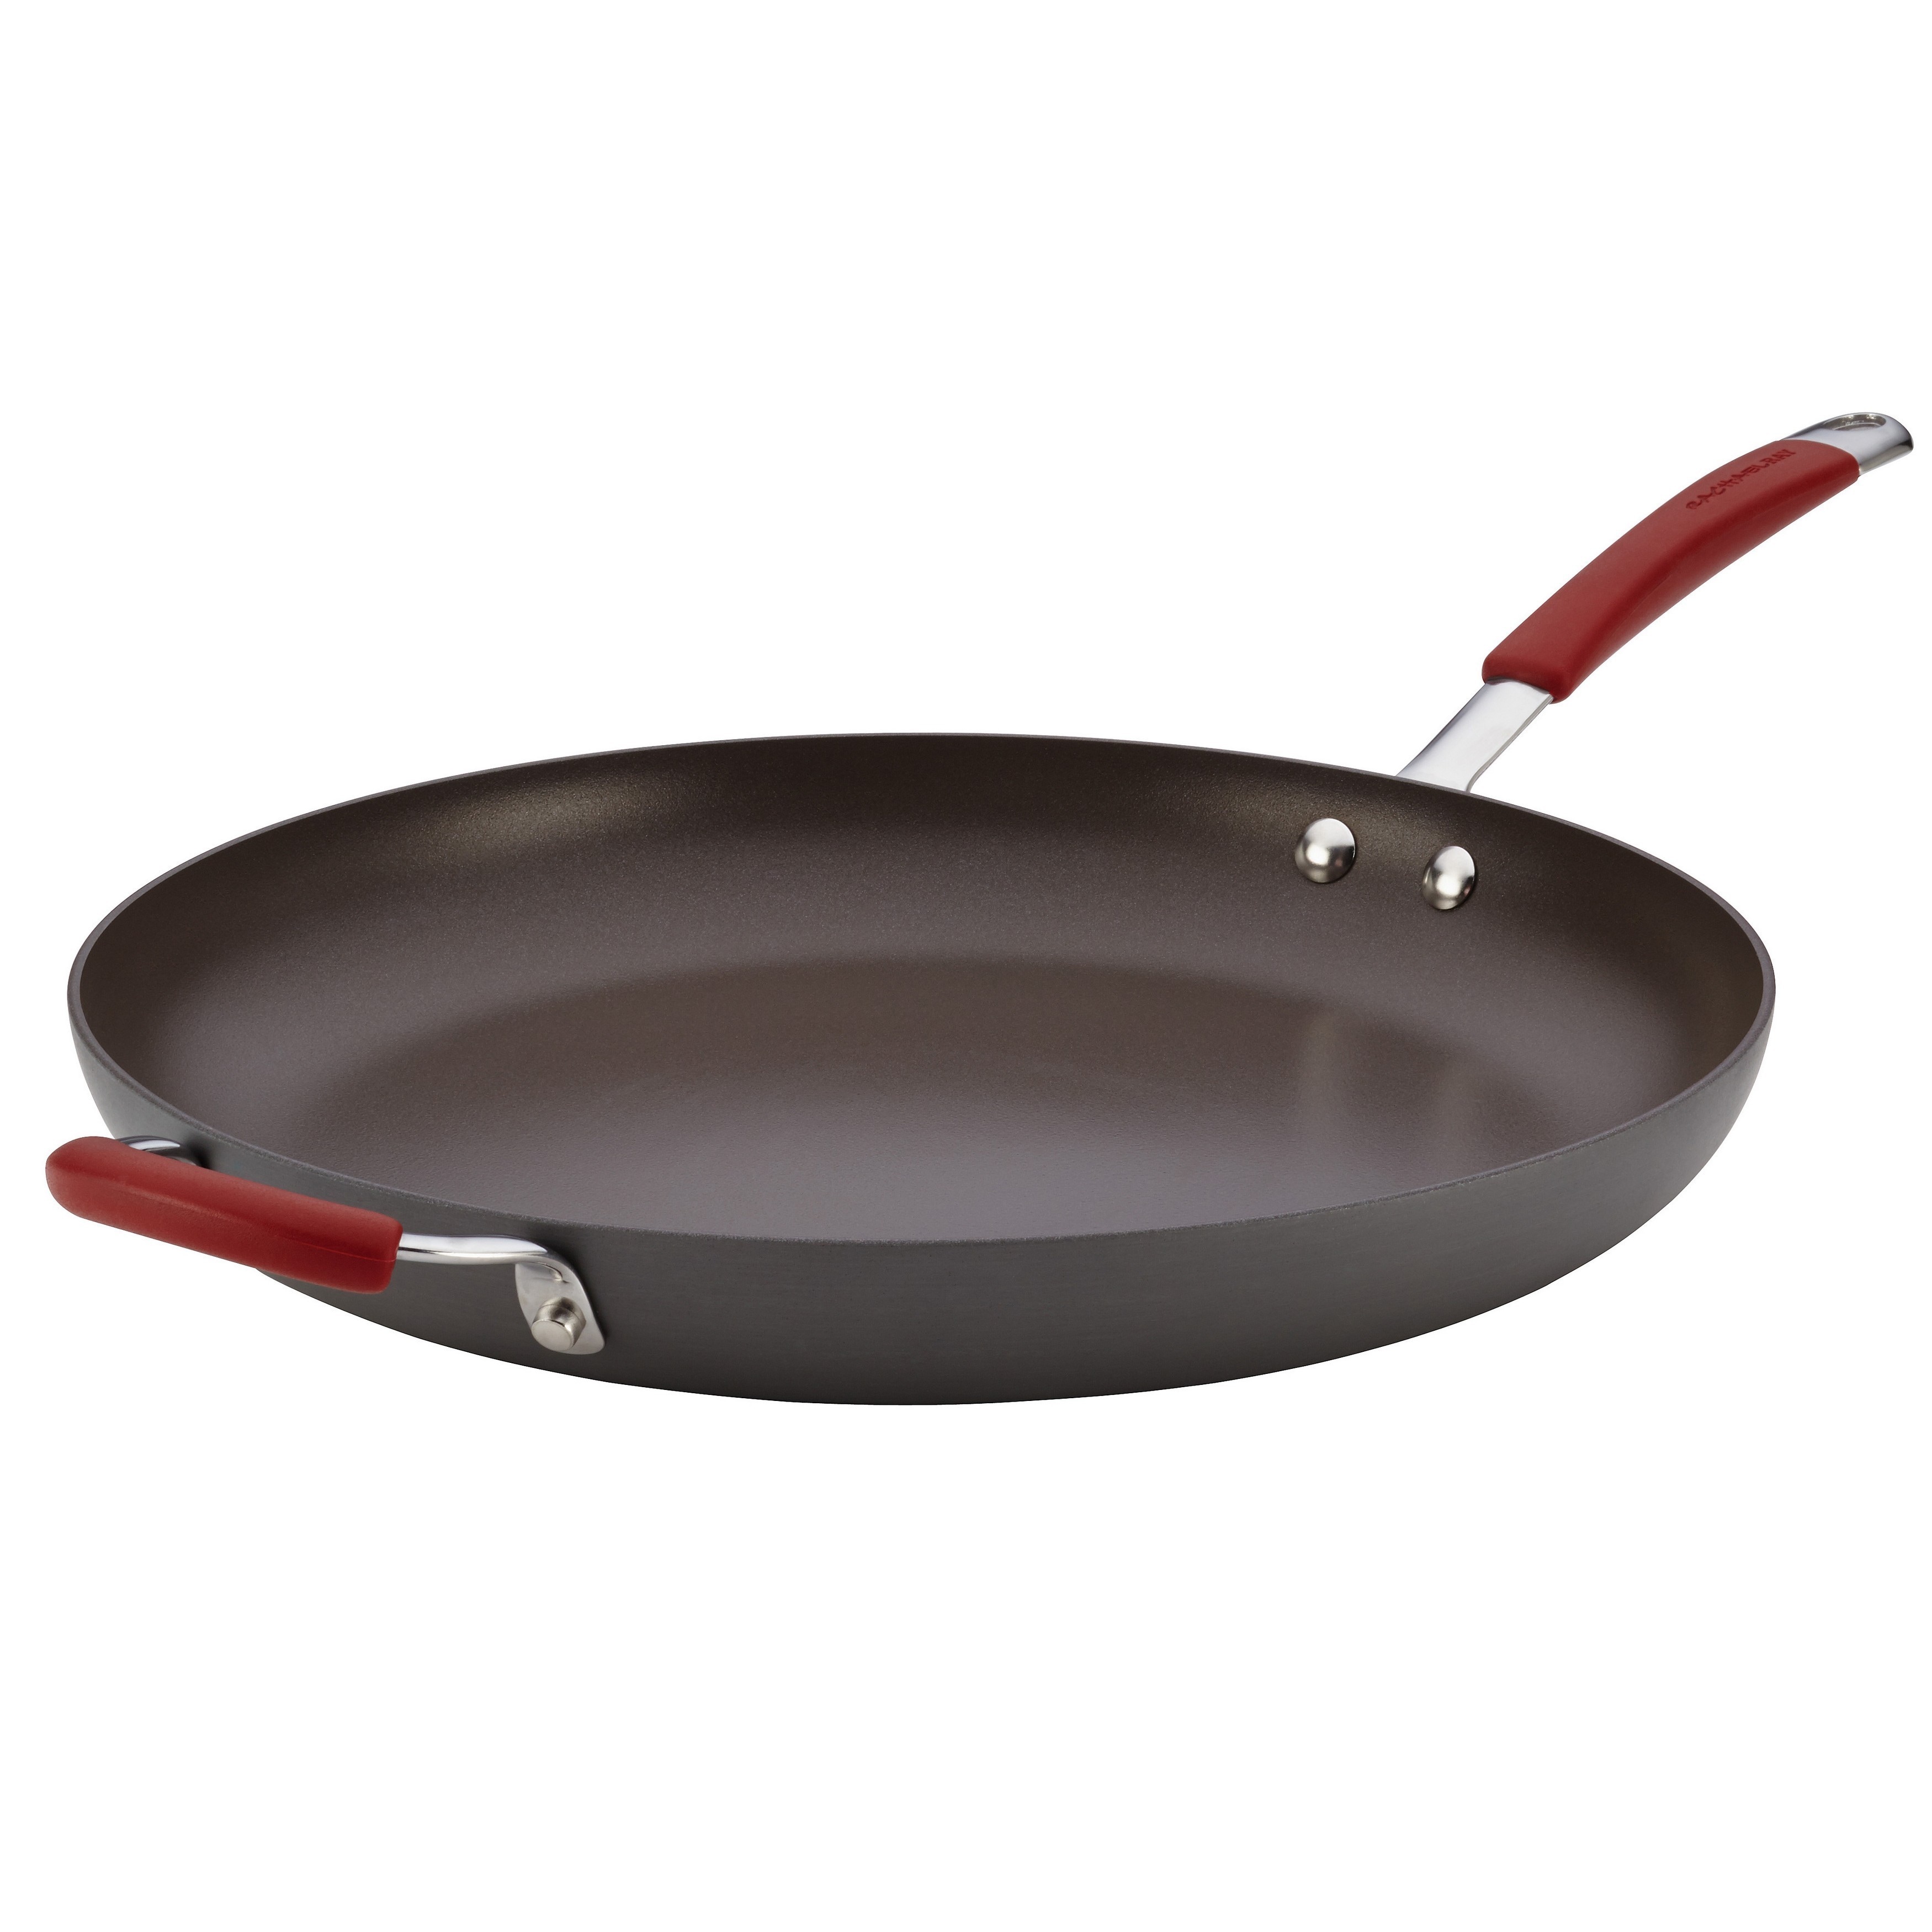 14 saute pan with lid